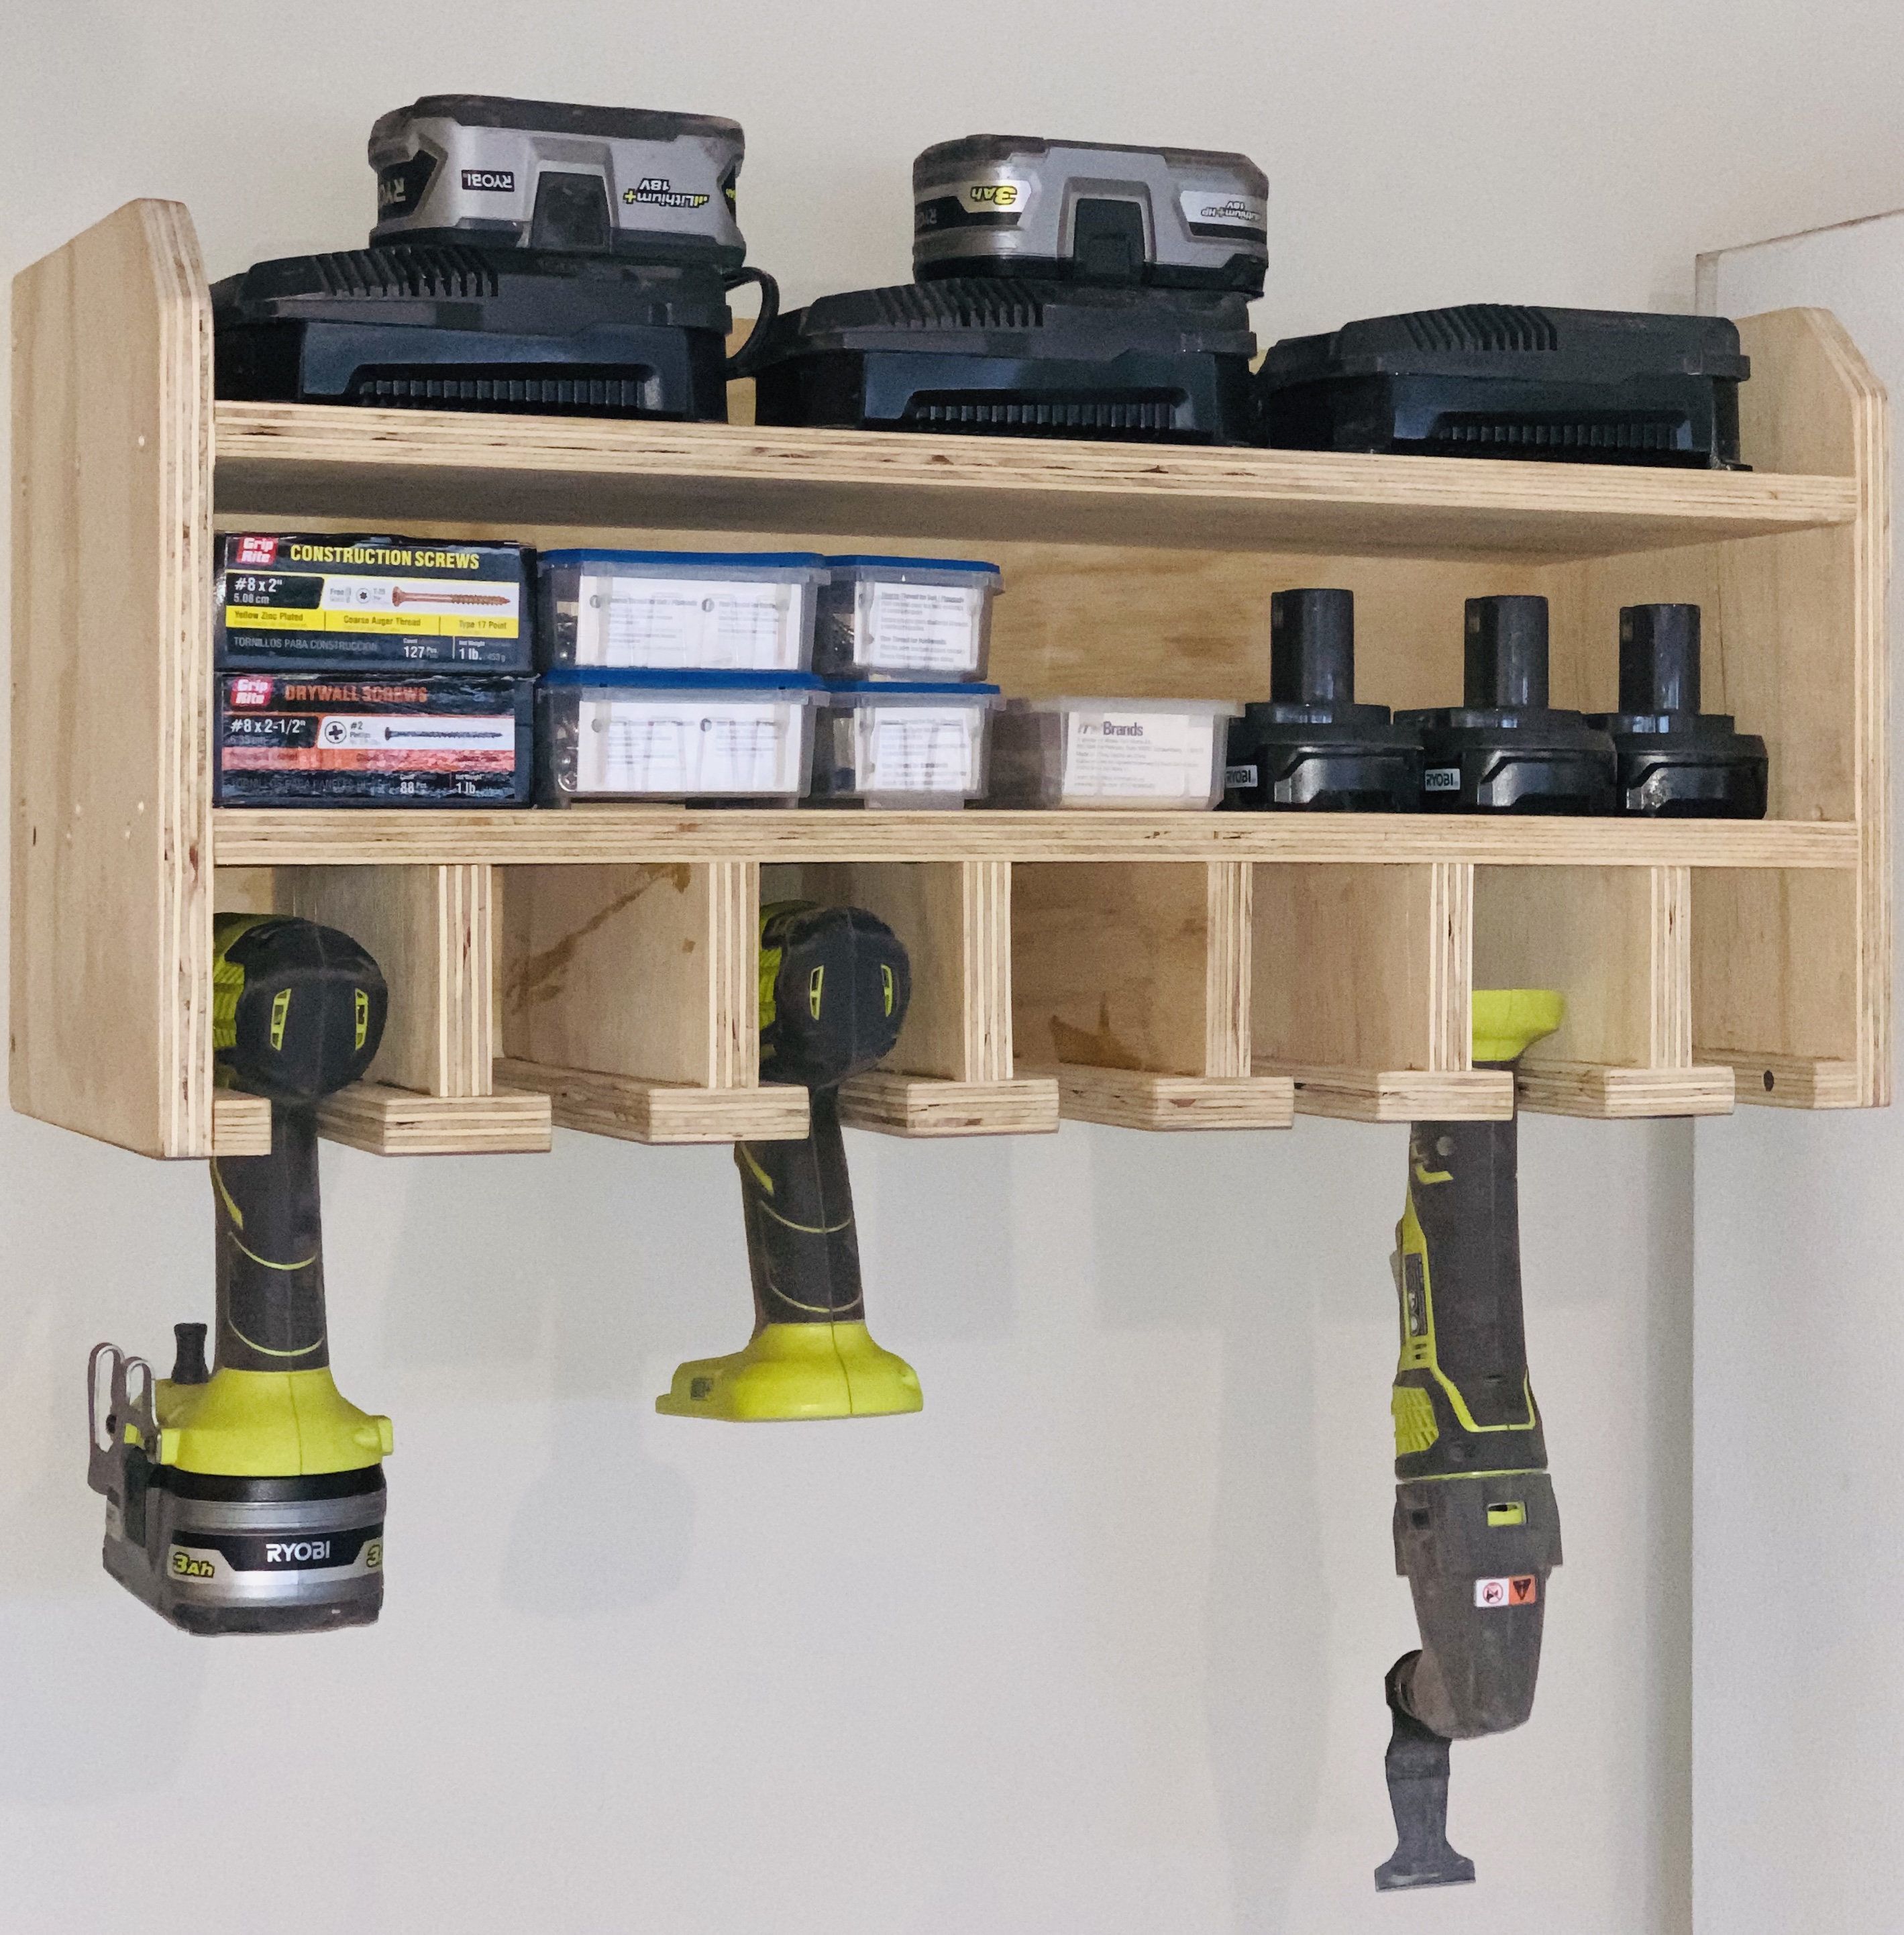 Cordless Tool Holder with 7 Slots and Power strip - Cordless Tool Holder with 7 Slots and Power strip -   17 diy Organization wood ideas